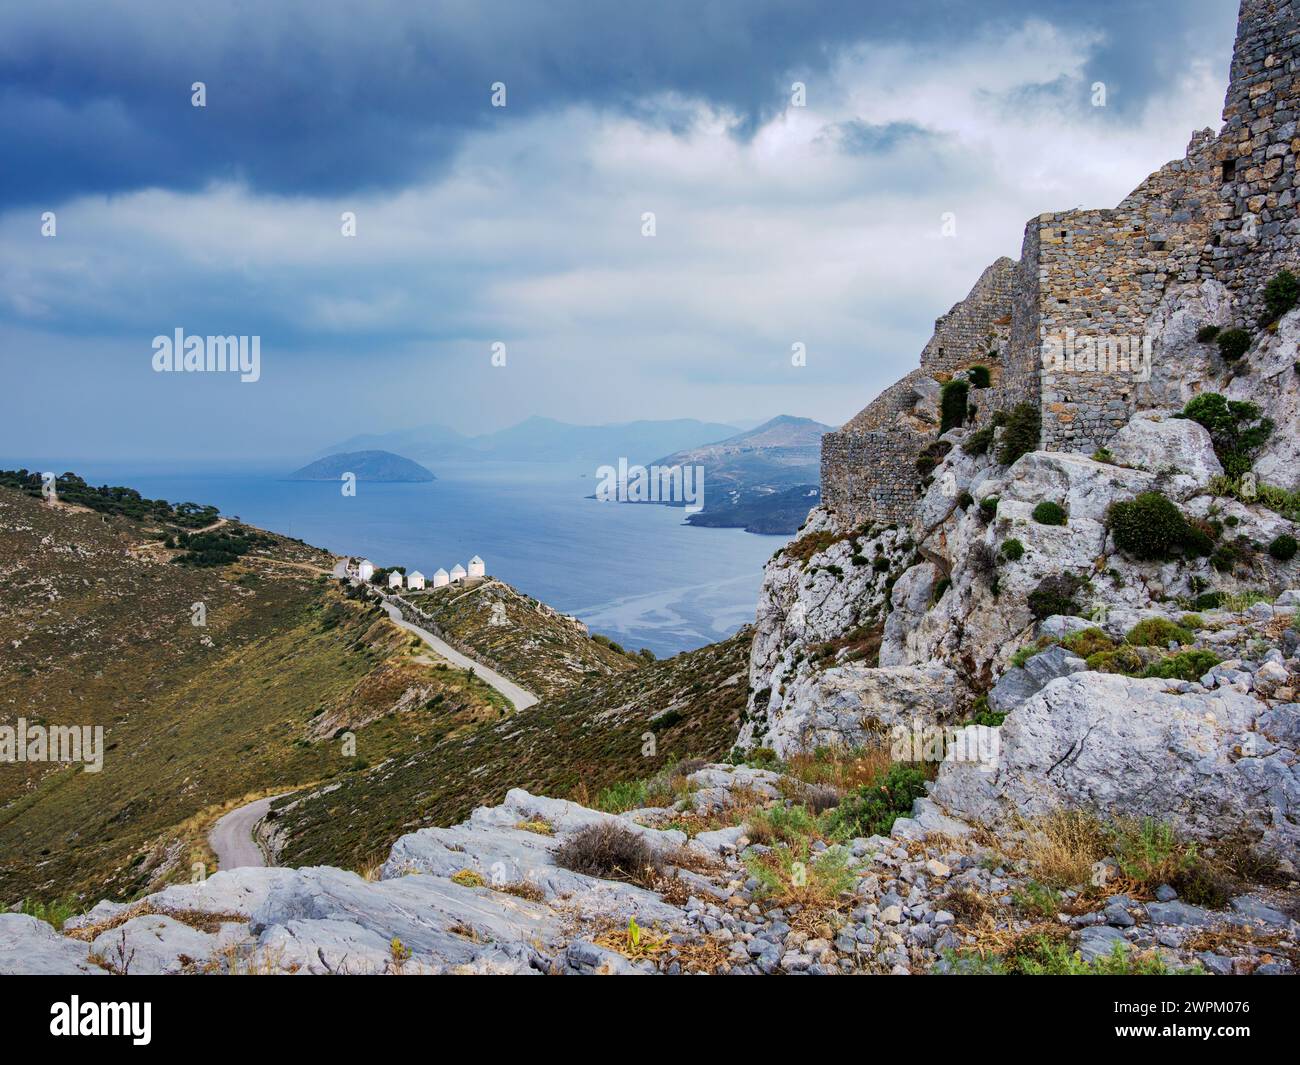 Medieval Castle and Windmills of Pandeli with stormy weather, Leros Island, Dodecanese, Greek Islands, Greece, Europe Stock Photo